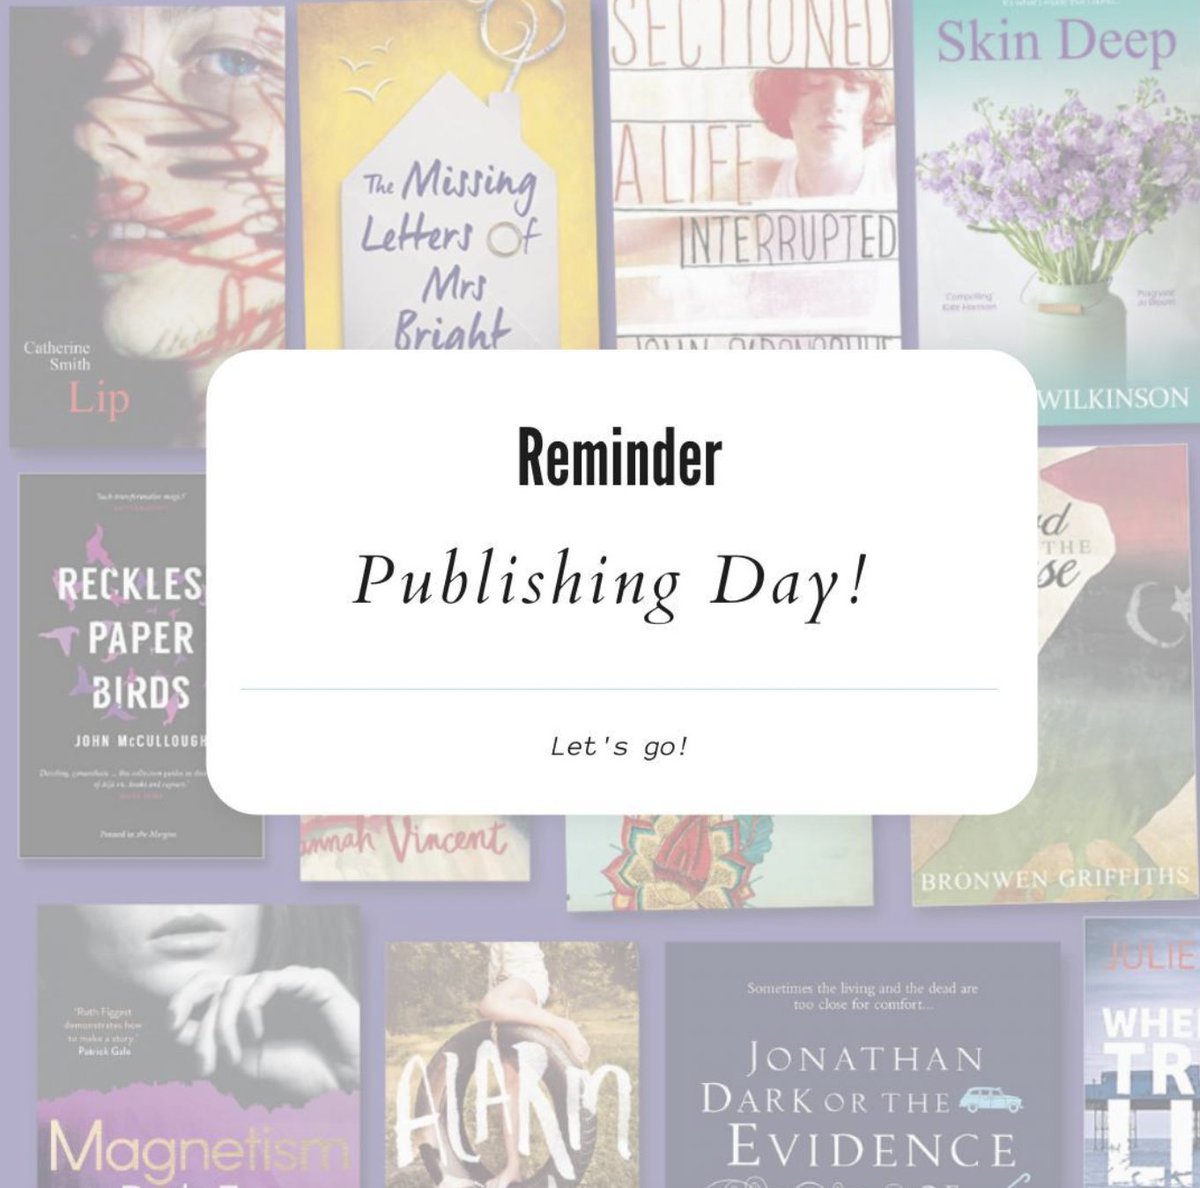 If you're a writer with a manuscript you want to get published, then you need to come to our online #PublishingDay on Saturday 18 May to find out how. A full day of workshops from industry professionals will help you to make your writing dreams a reality. eventbrite.co.uk/o/the-creative…